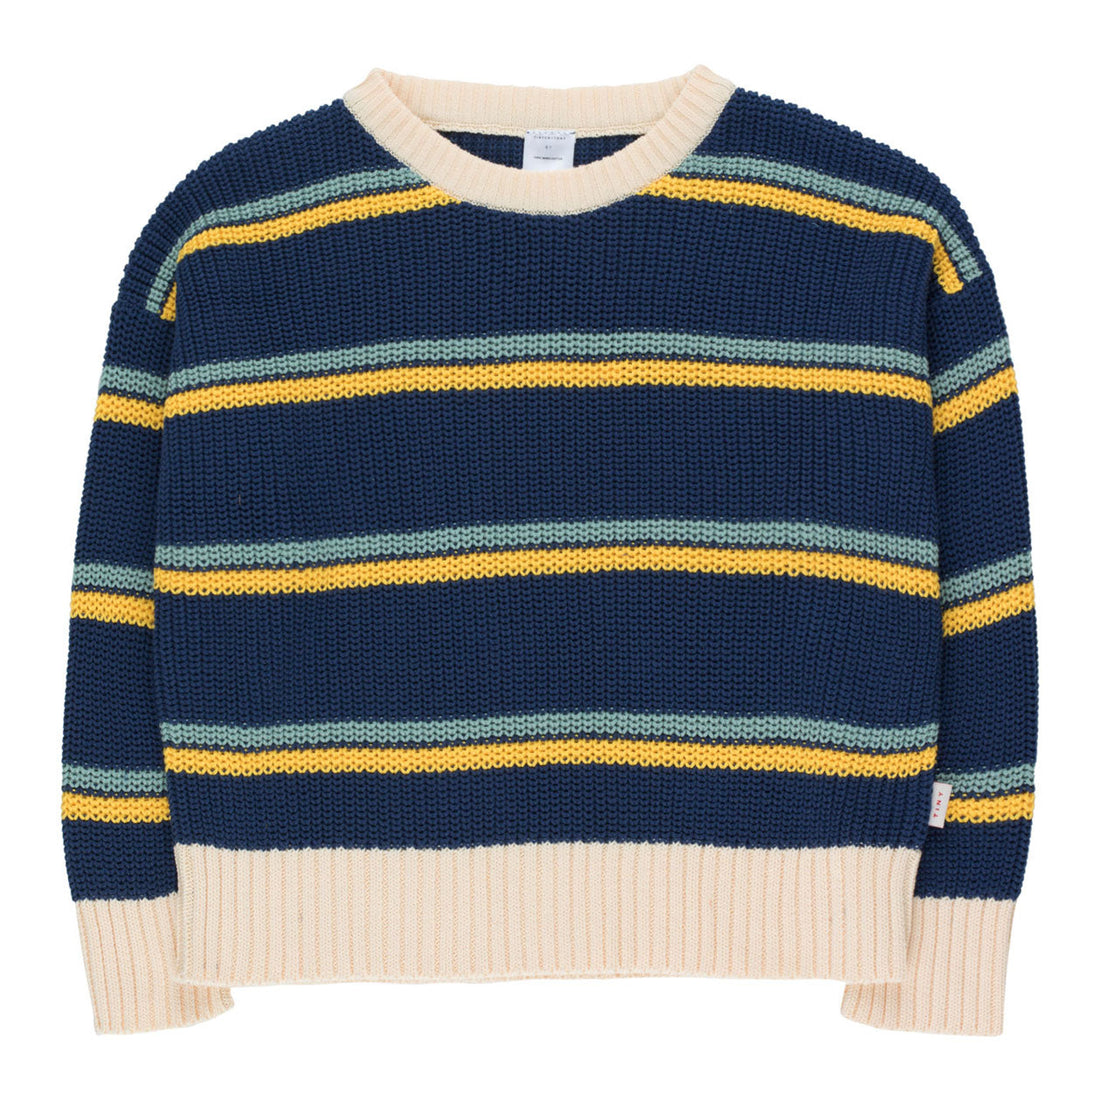 Tiny Cottons knitwear Tiny Cottons Light Navy/Yellow/Sea Green Stripes Sweater